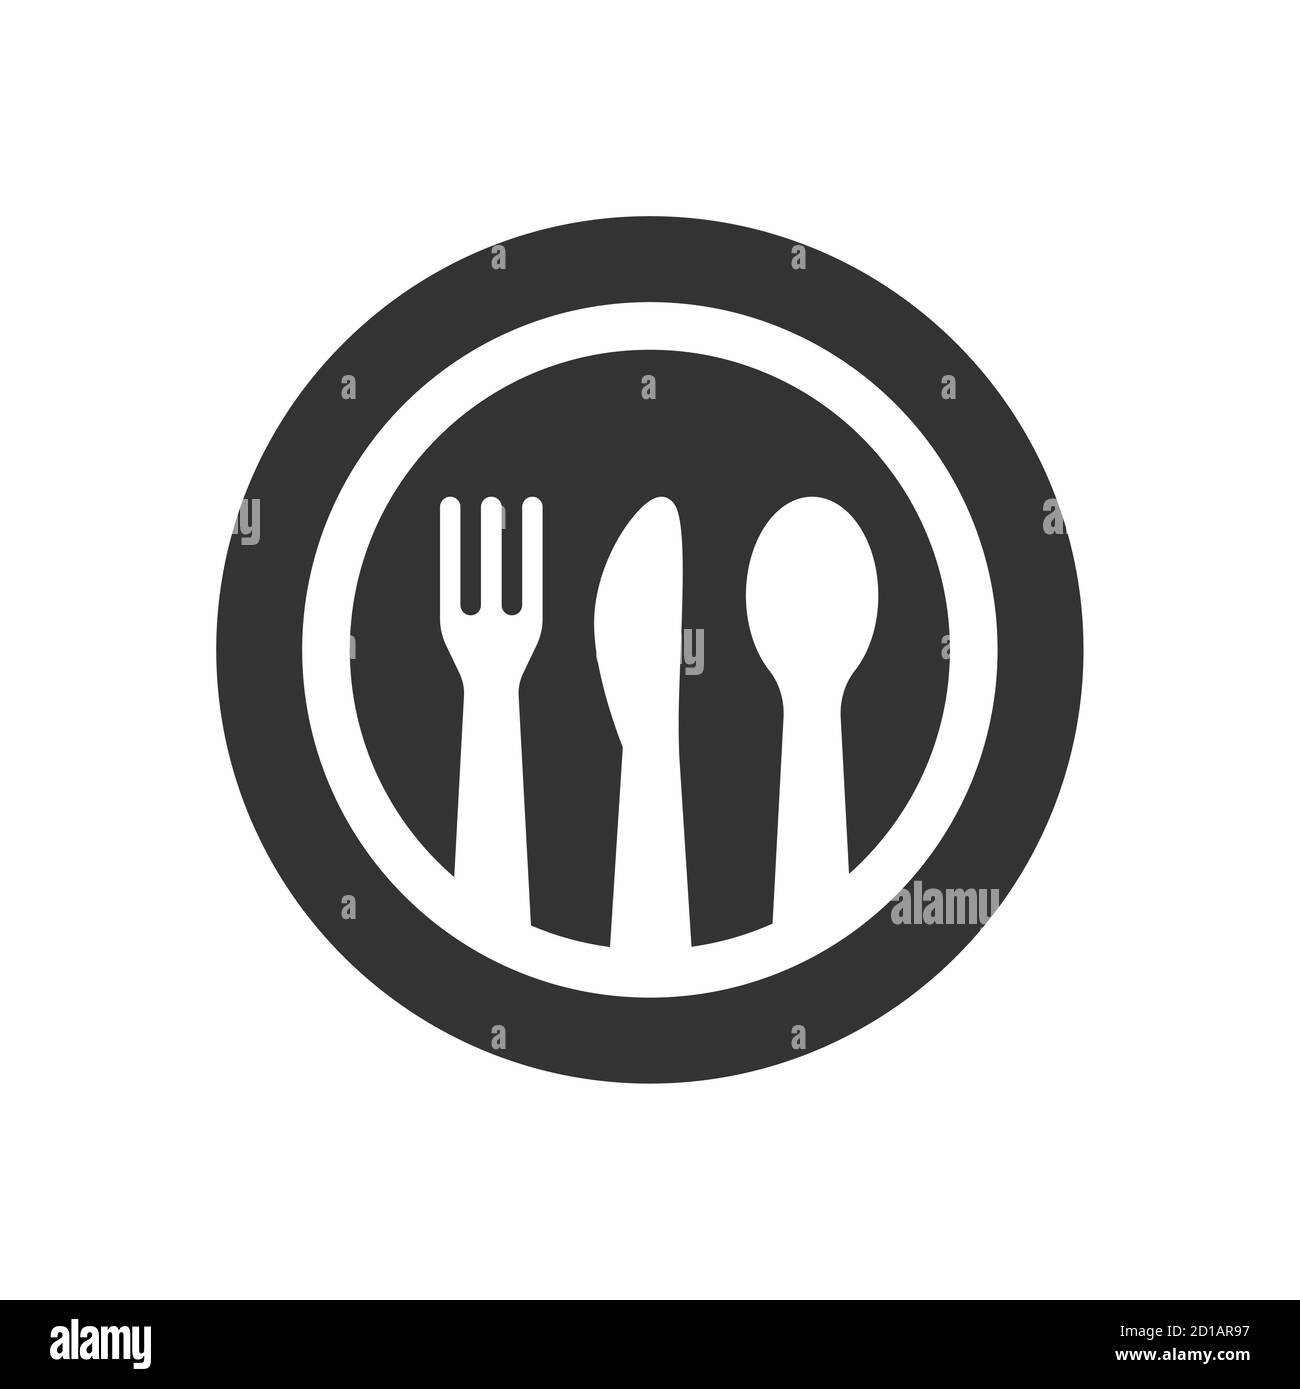 Spoon, knife, fork and a plate vector icon. Meal, restaurant logo glyph symbol. Stock Vector